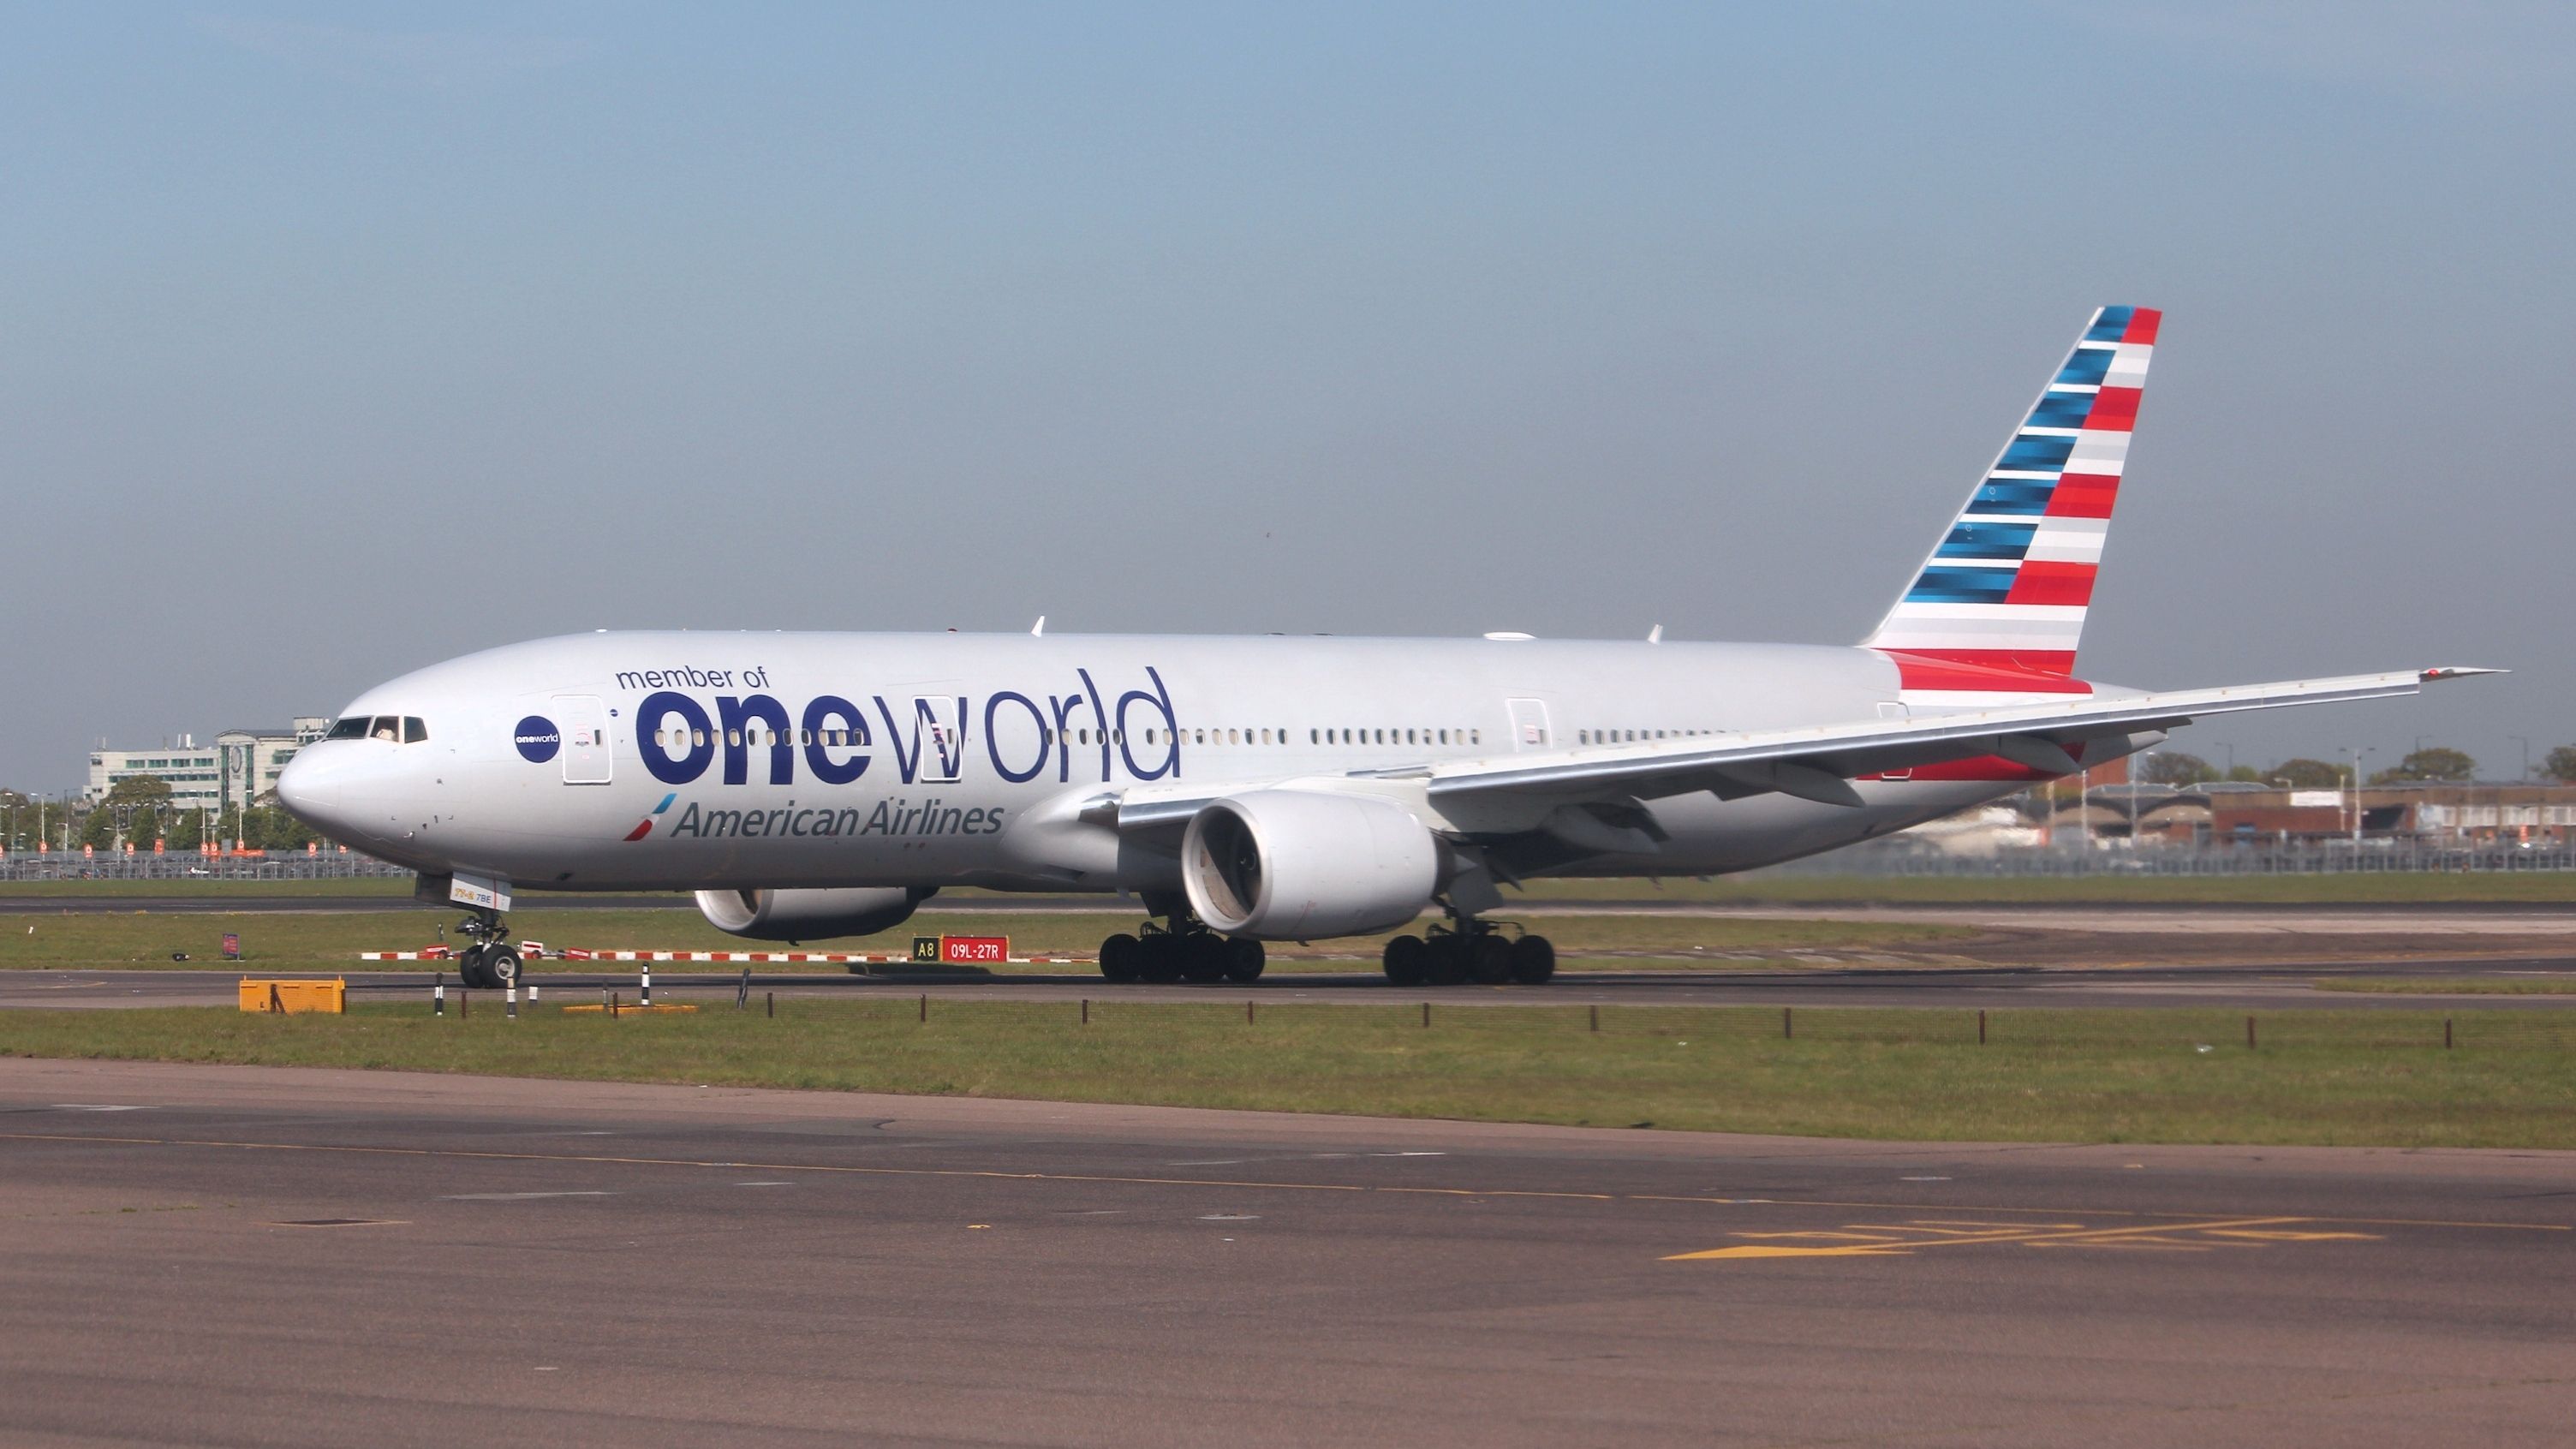 An American Airlines aircraft in oneworld livery taxiing to the airport gate.